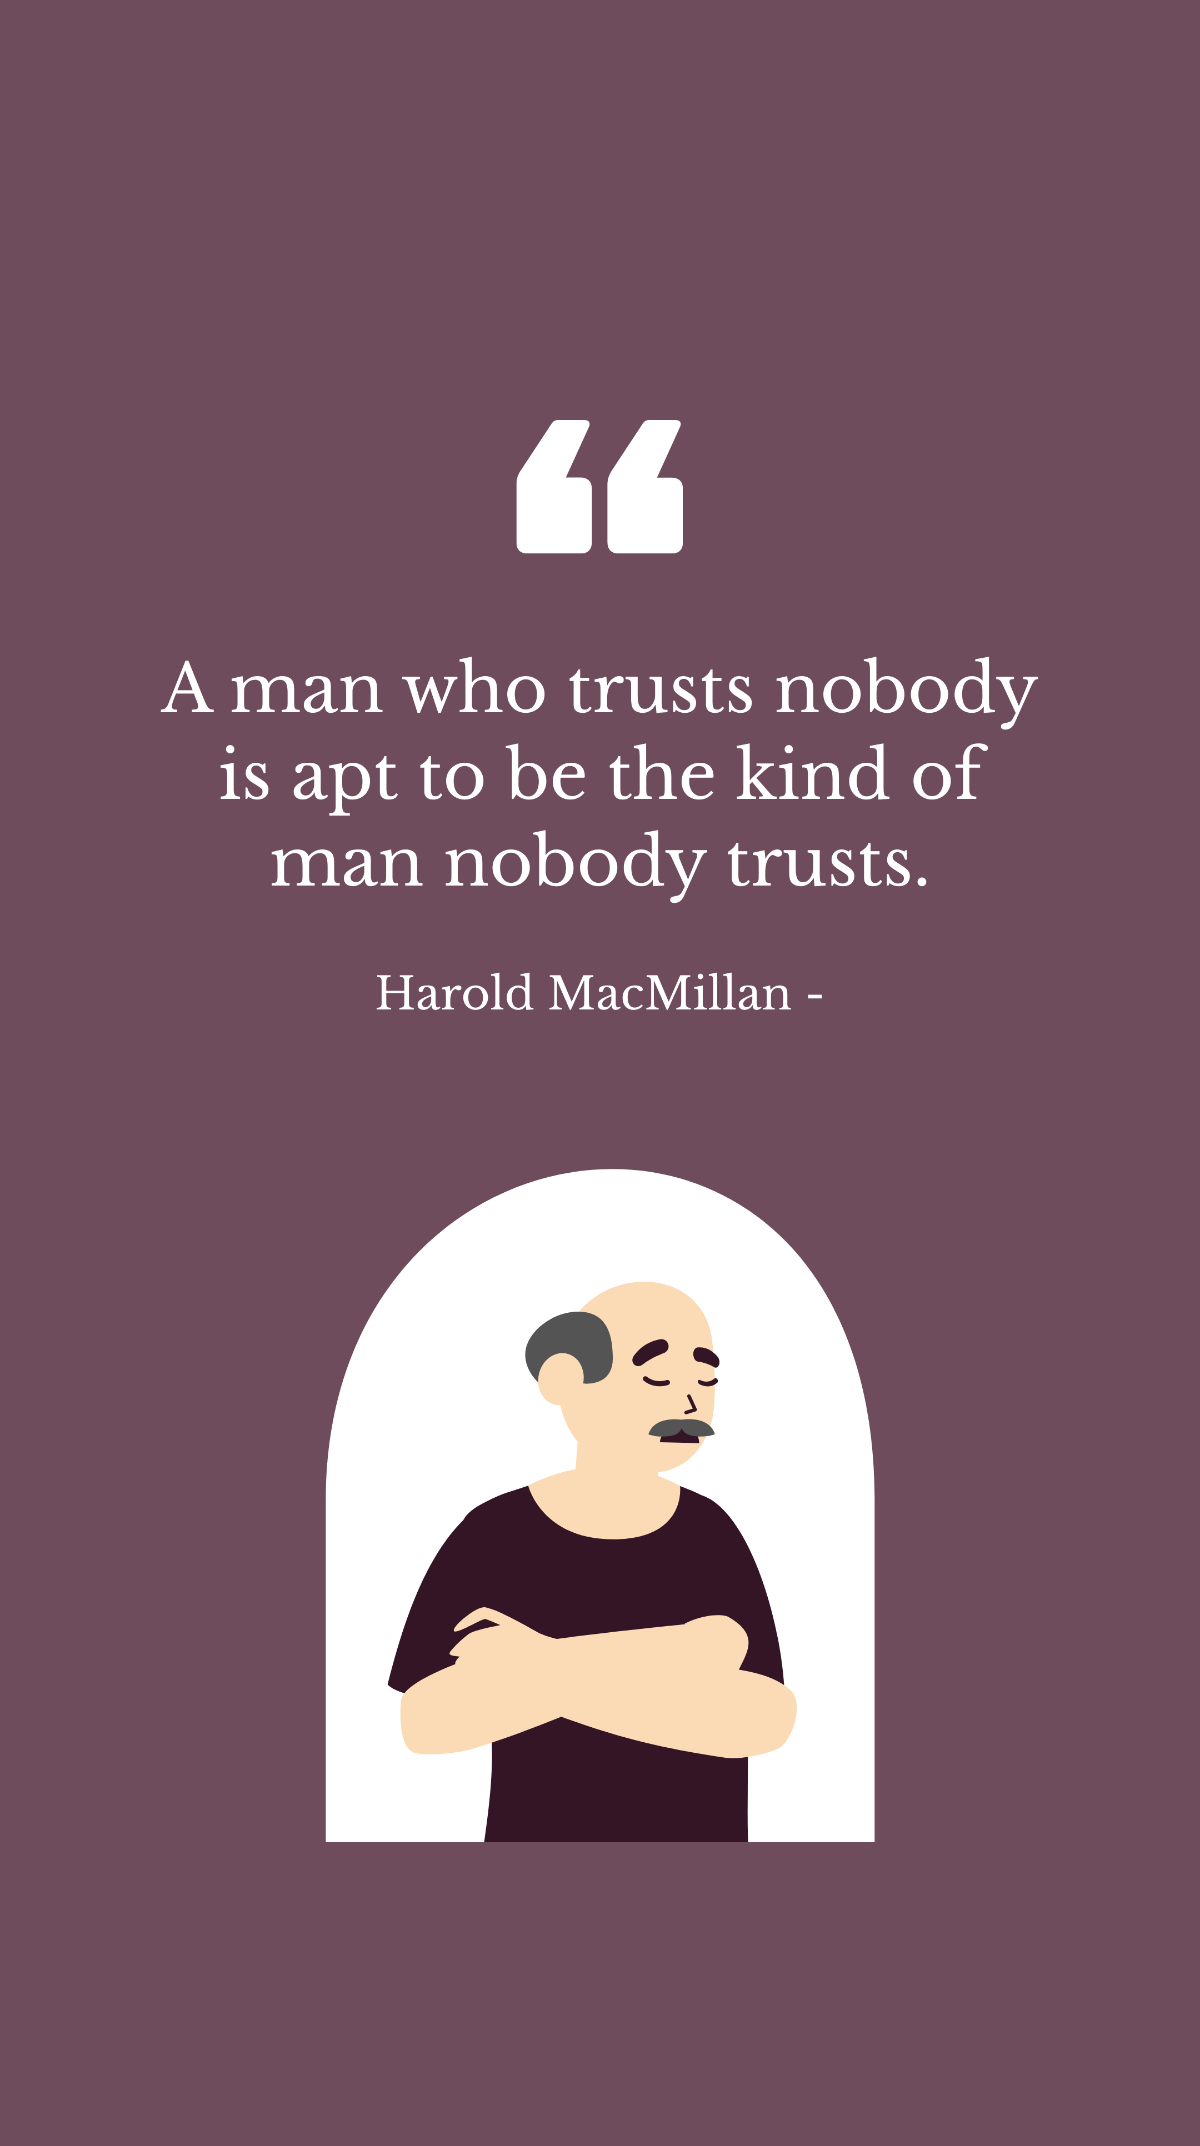 Free Harold MacMillan - A man who trusts nobody is apt to be the kind of man nobody trusts. Template